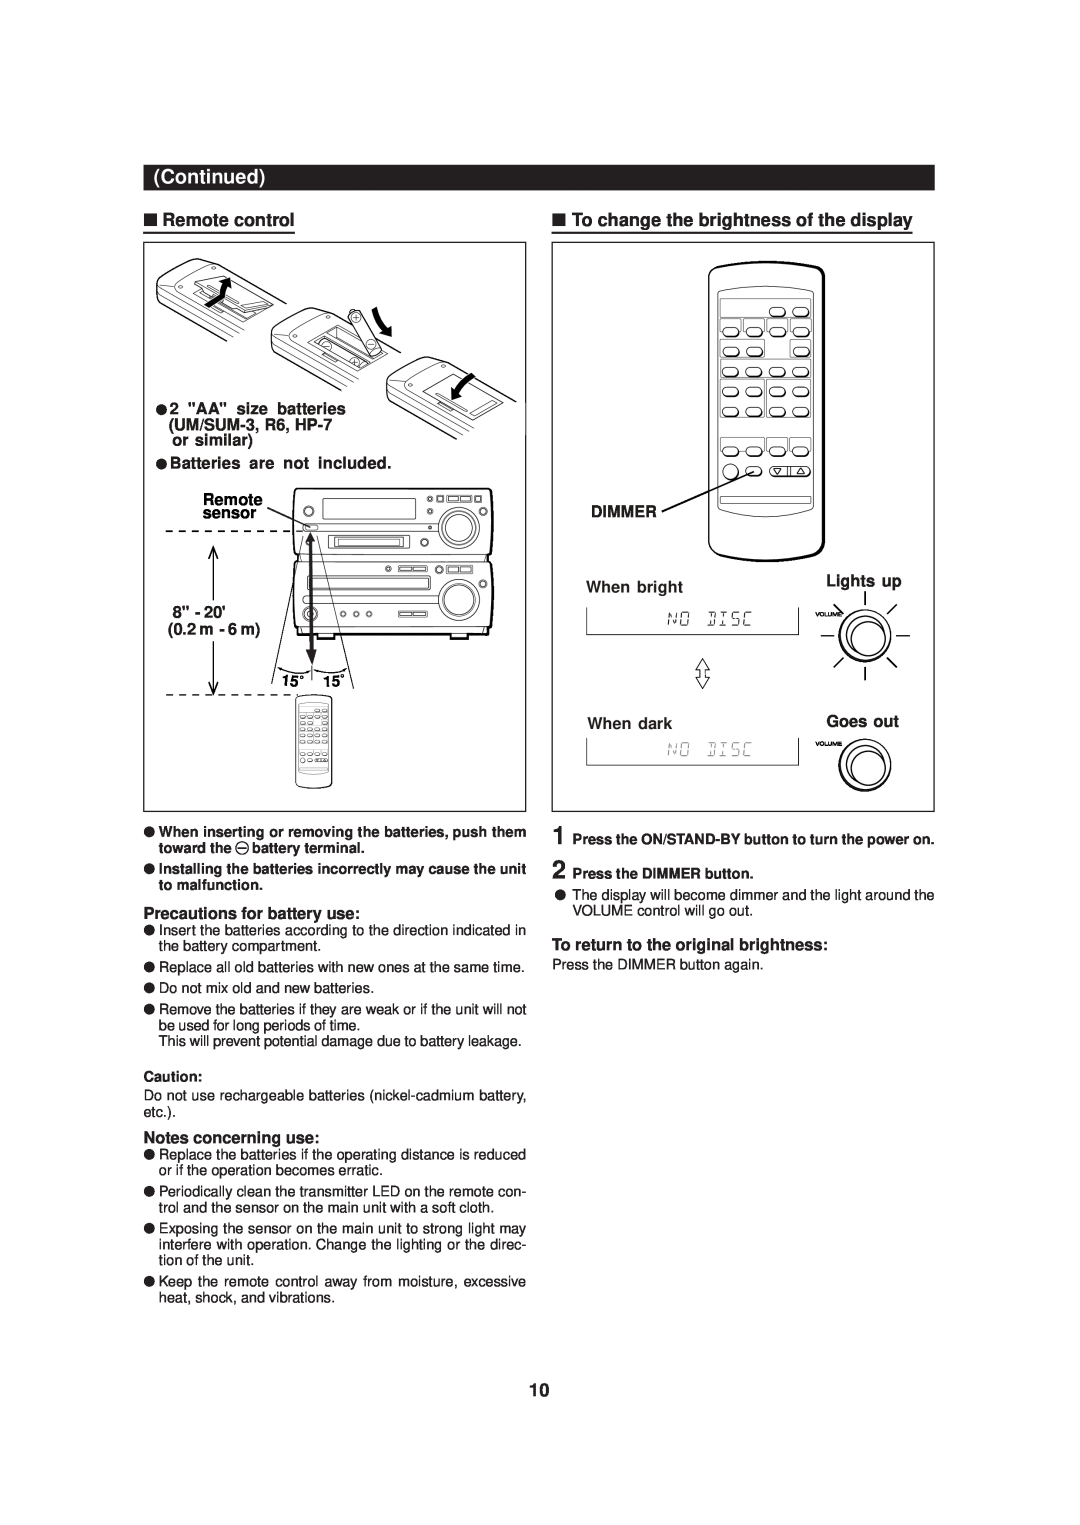 Sharp MD-MX20 operation manual To change the brightness of the display, Continued, Remote control 